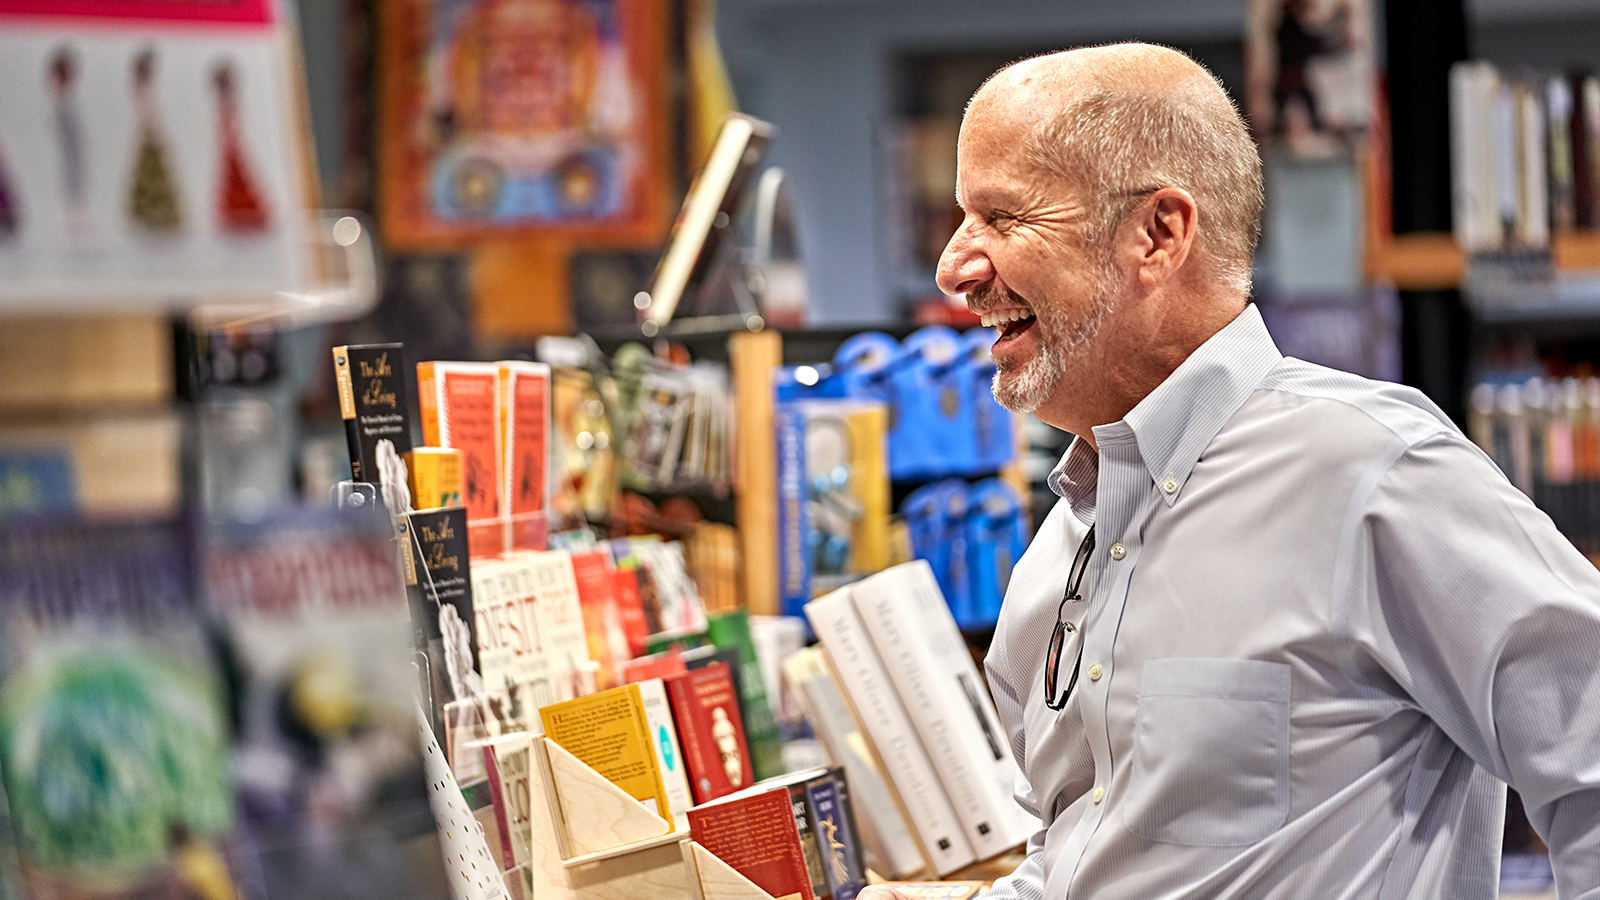 Man shops in the bookshop